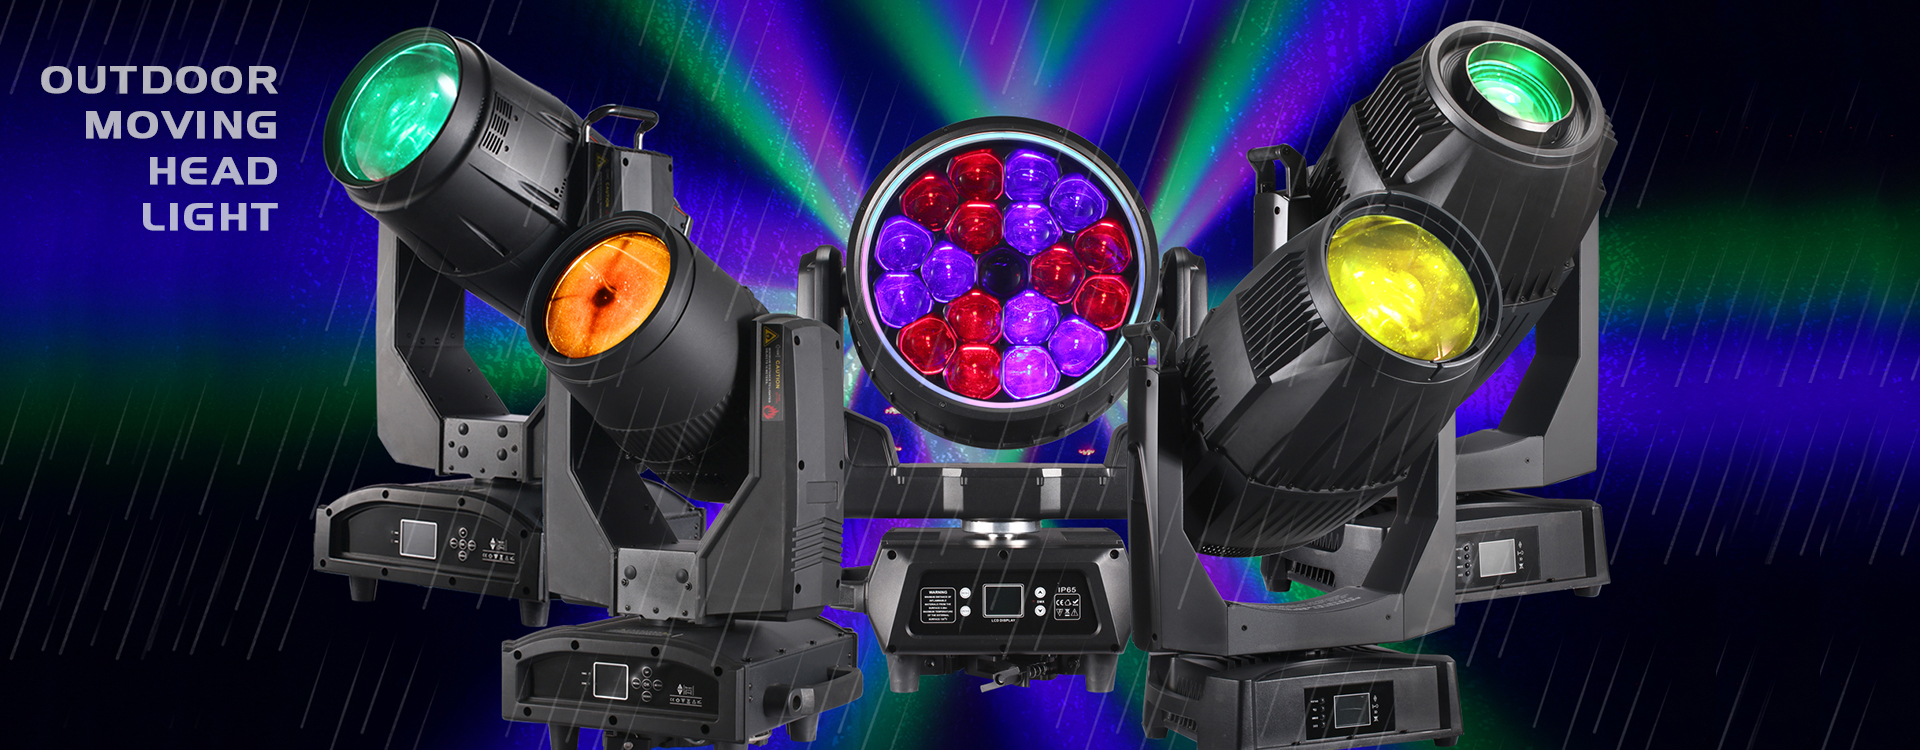 OUTDOOR MOVING HEAD IP65